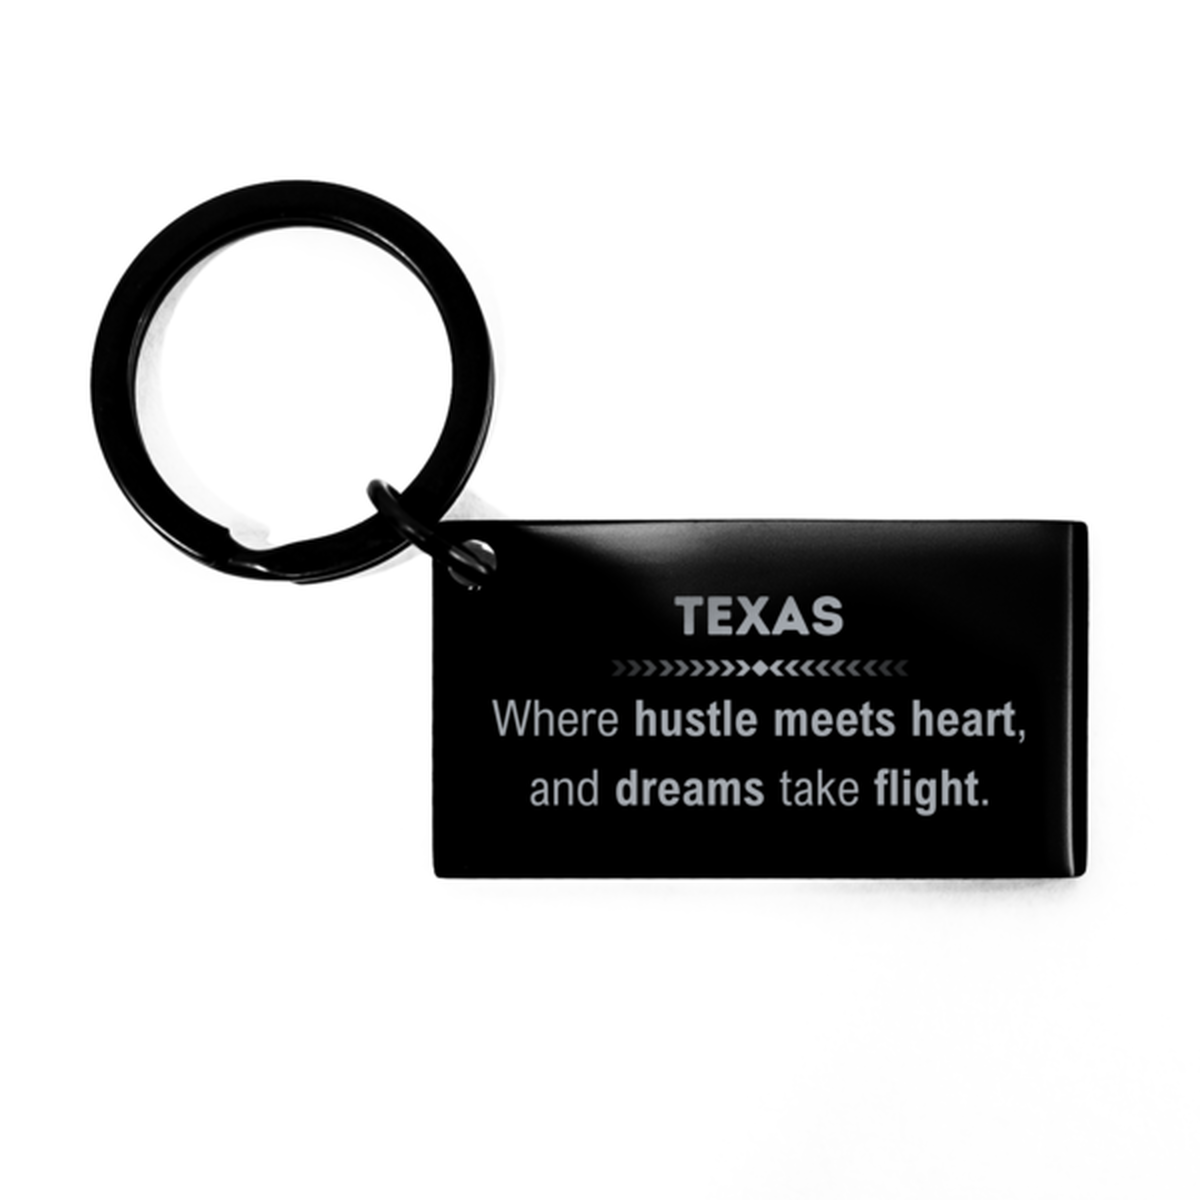 Texas: Where hustle meets heart, and dreams take flight, Texas Gifts, Proud Texas Christmas Birthday Texas Keychain, Texas State People, Men, Women, Friends